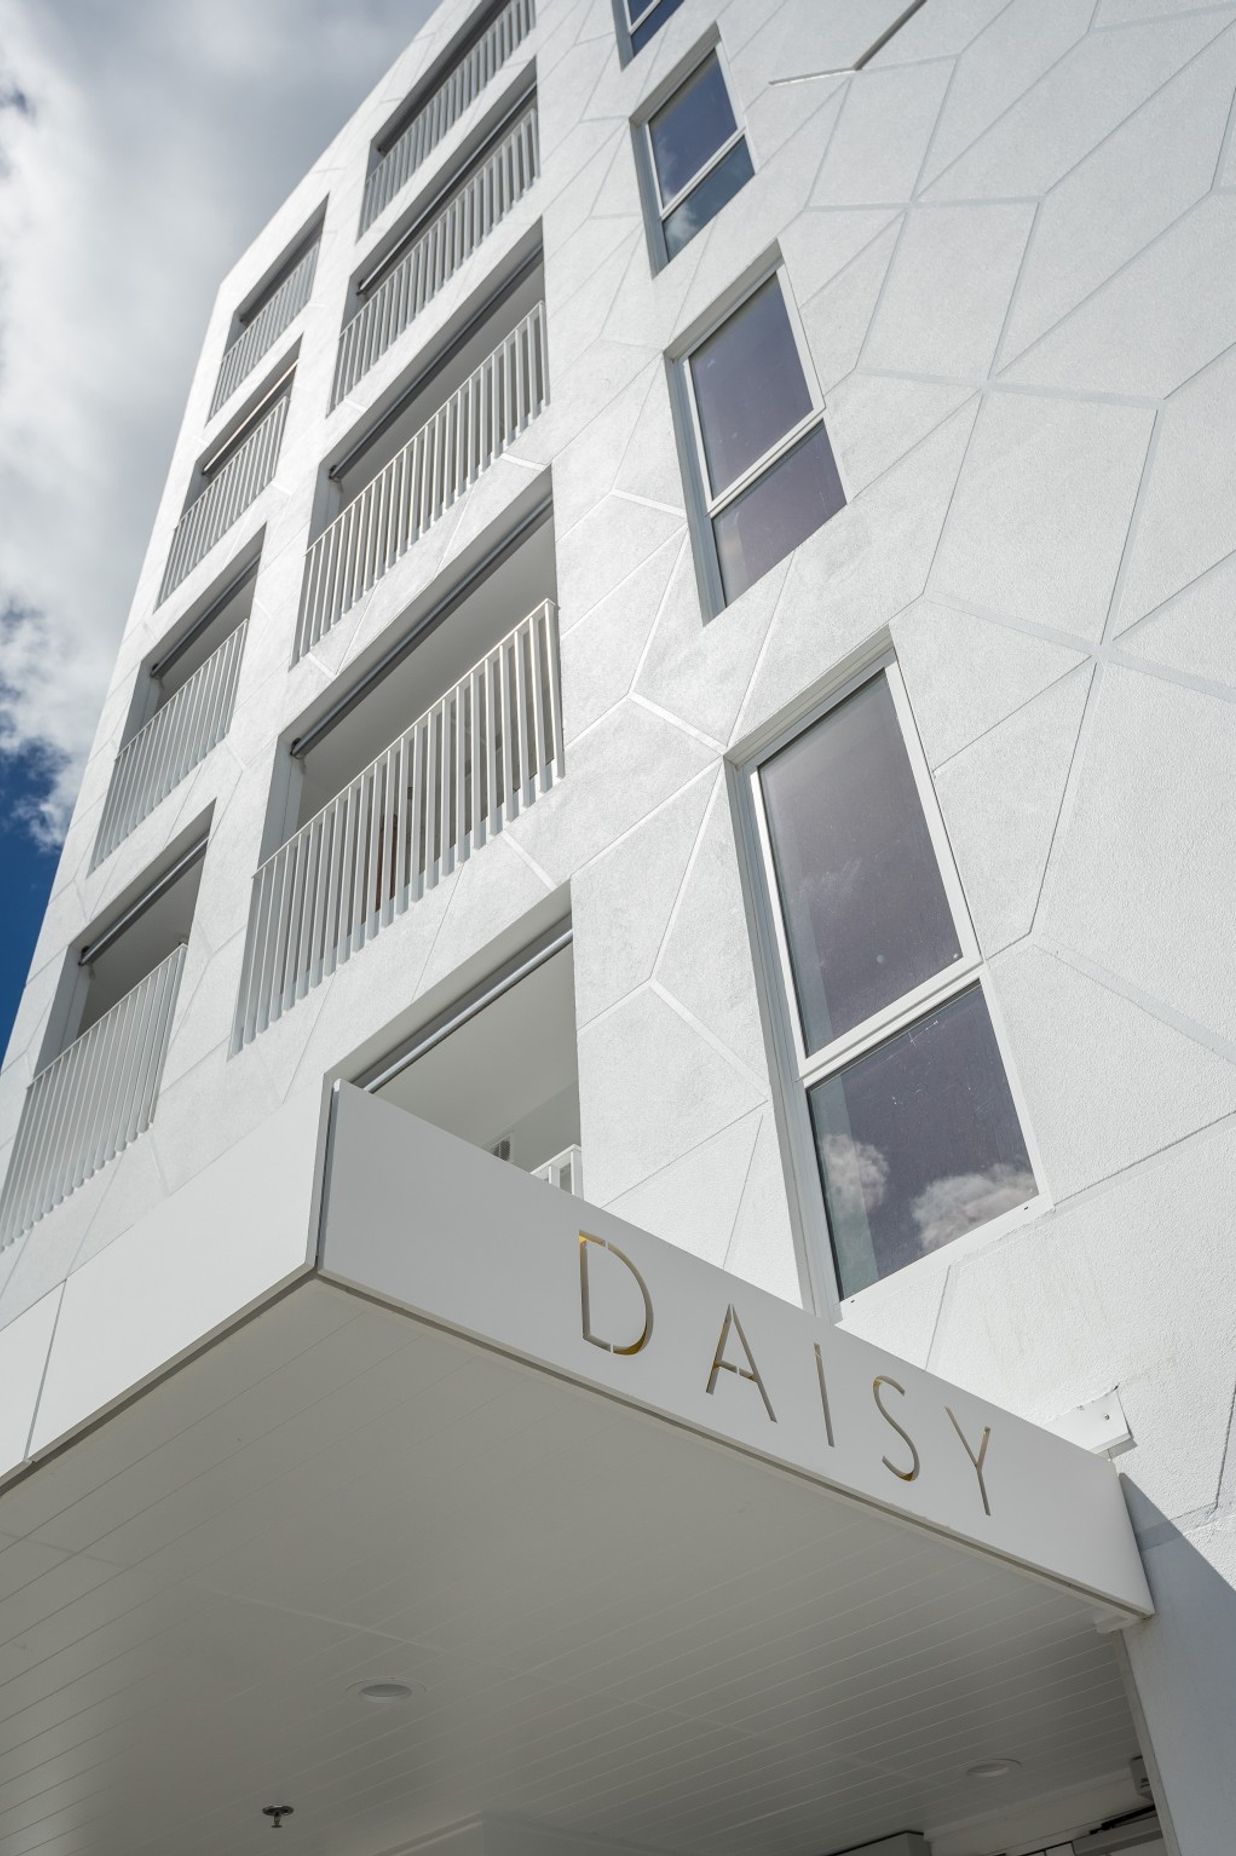 Daisy Apartments, Photography by Ockham Residential